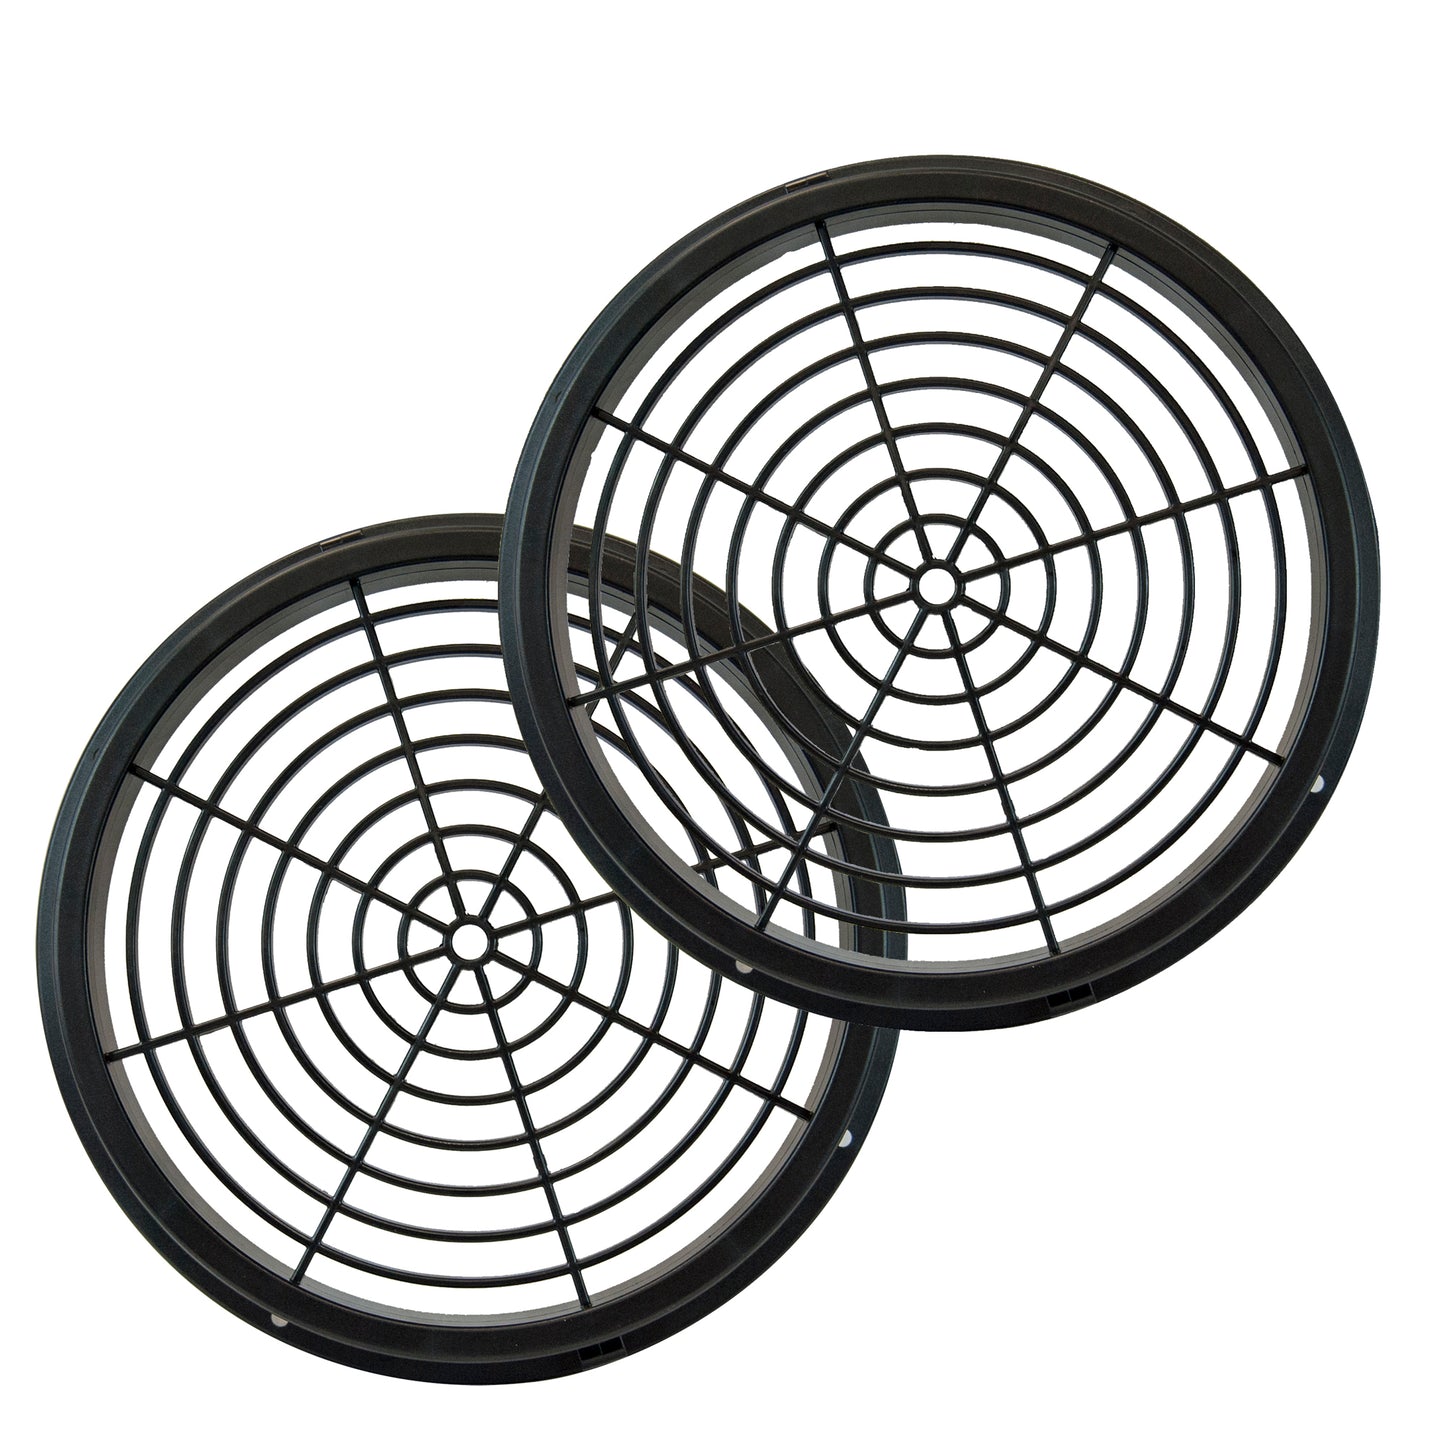 Air Inlet/Outlet for X-8 Confined Space Fan